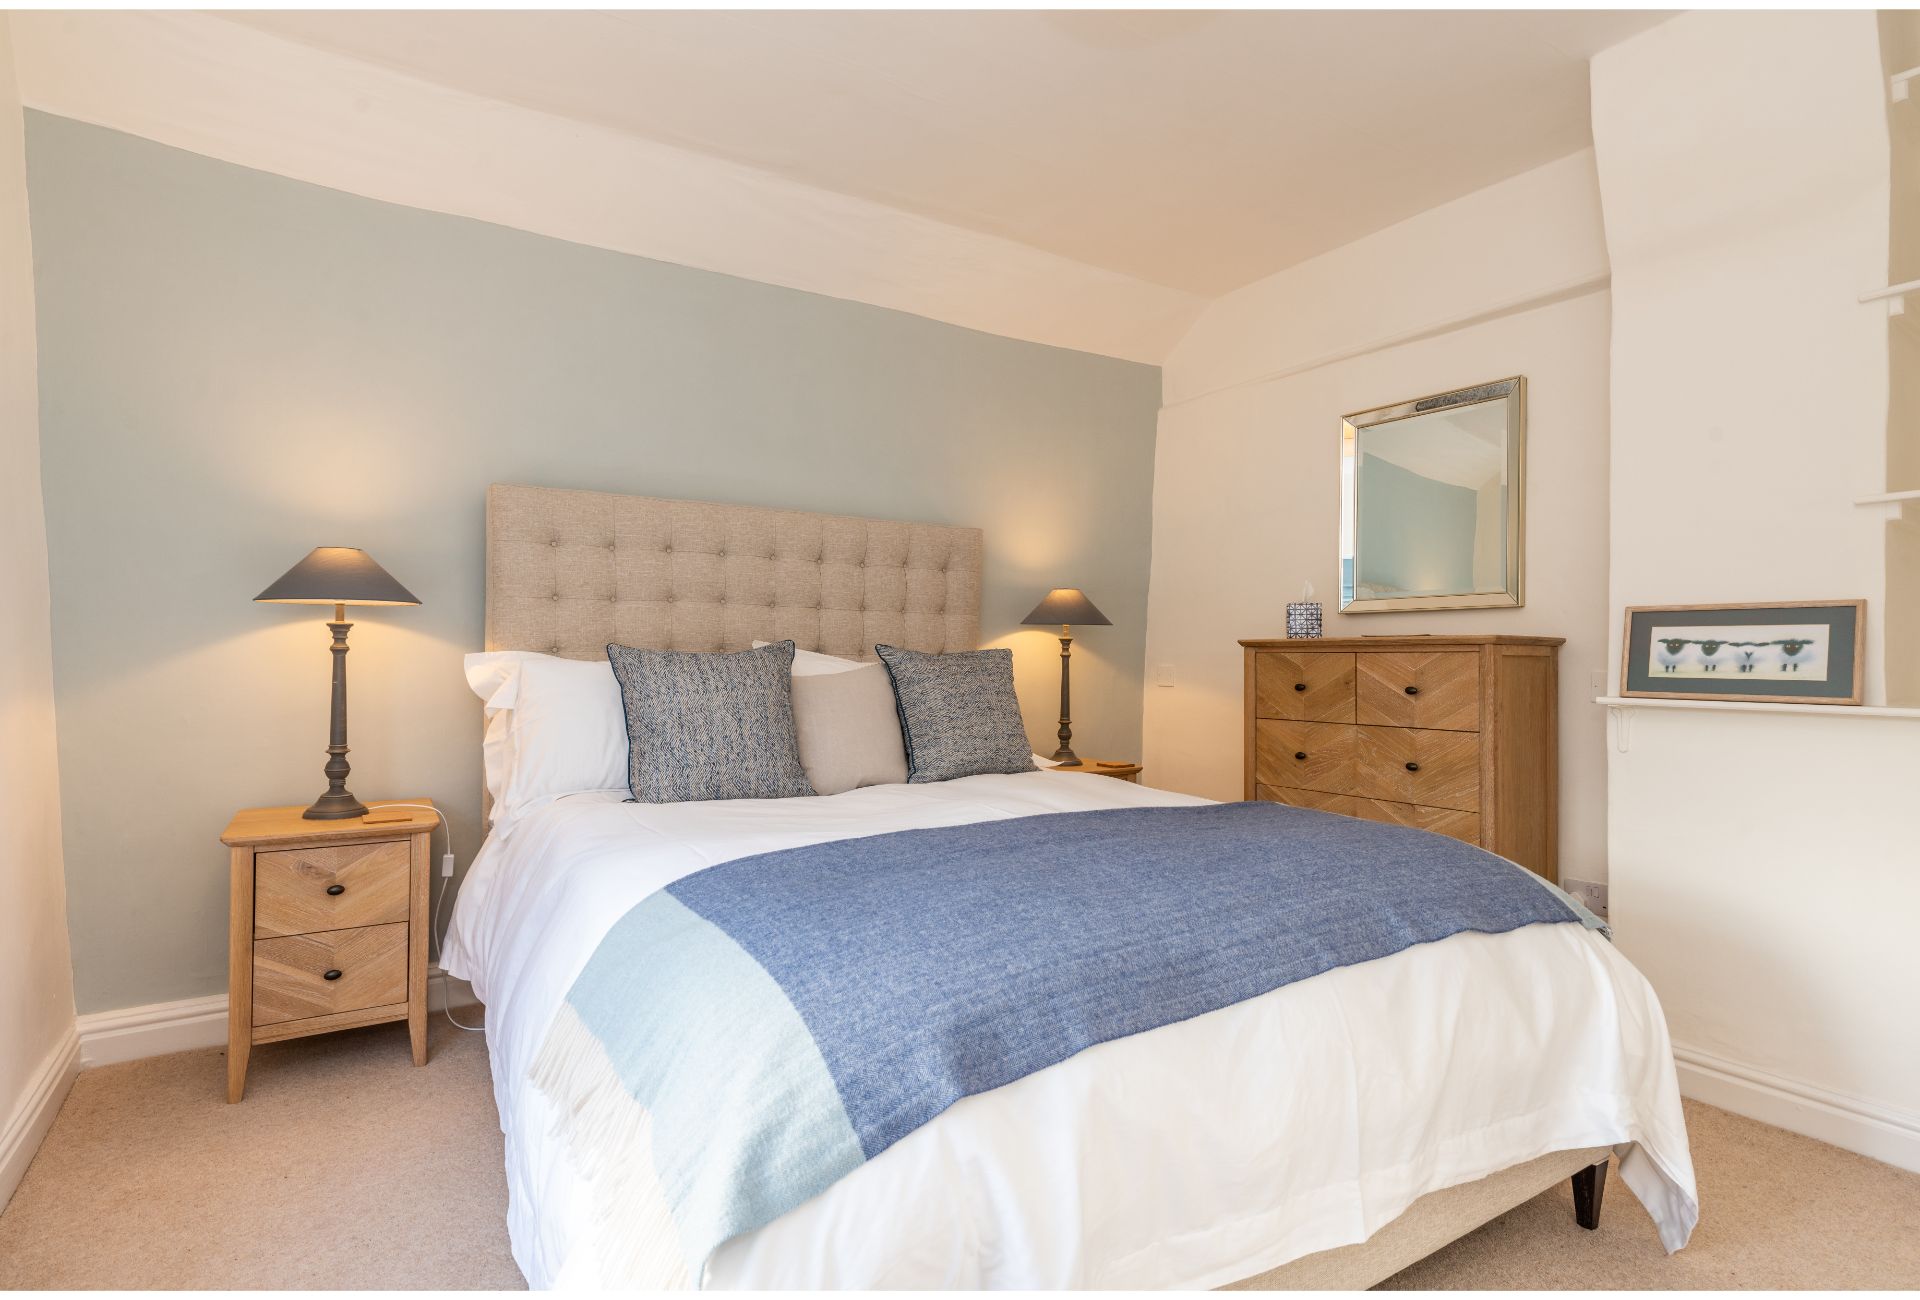 King Bedroom | Baslow Holiday Cottages - Near Chatsworth House | Peak District